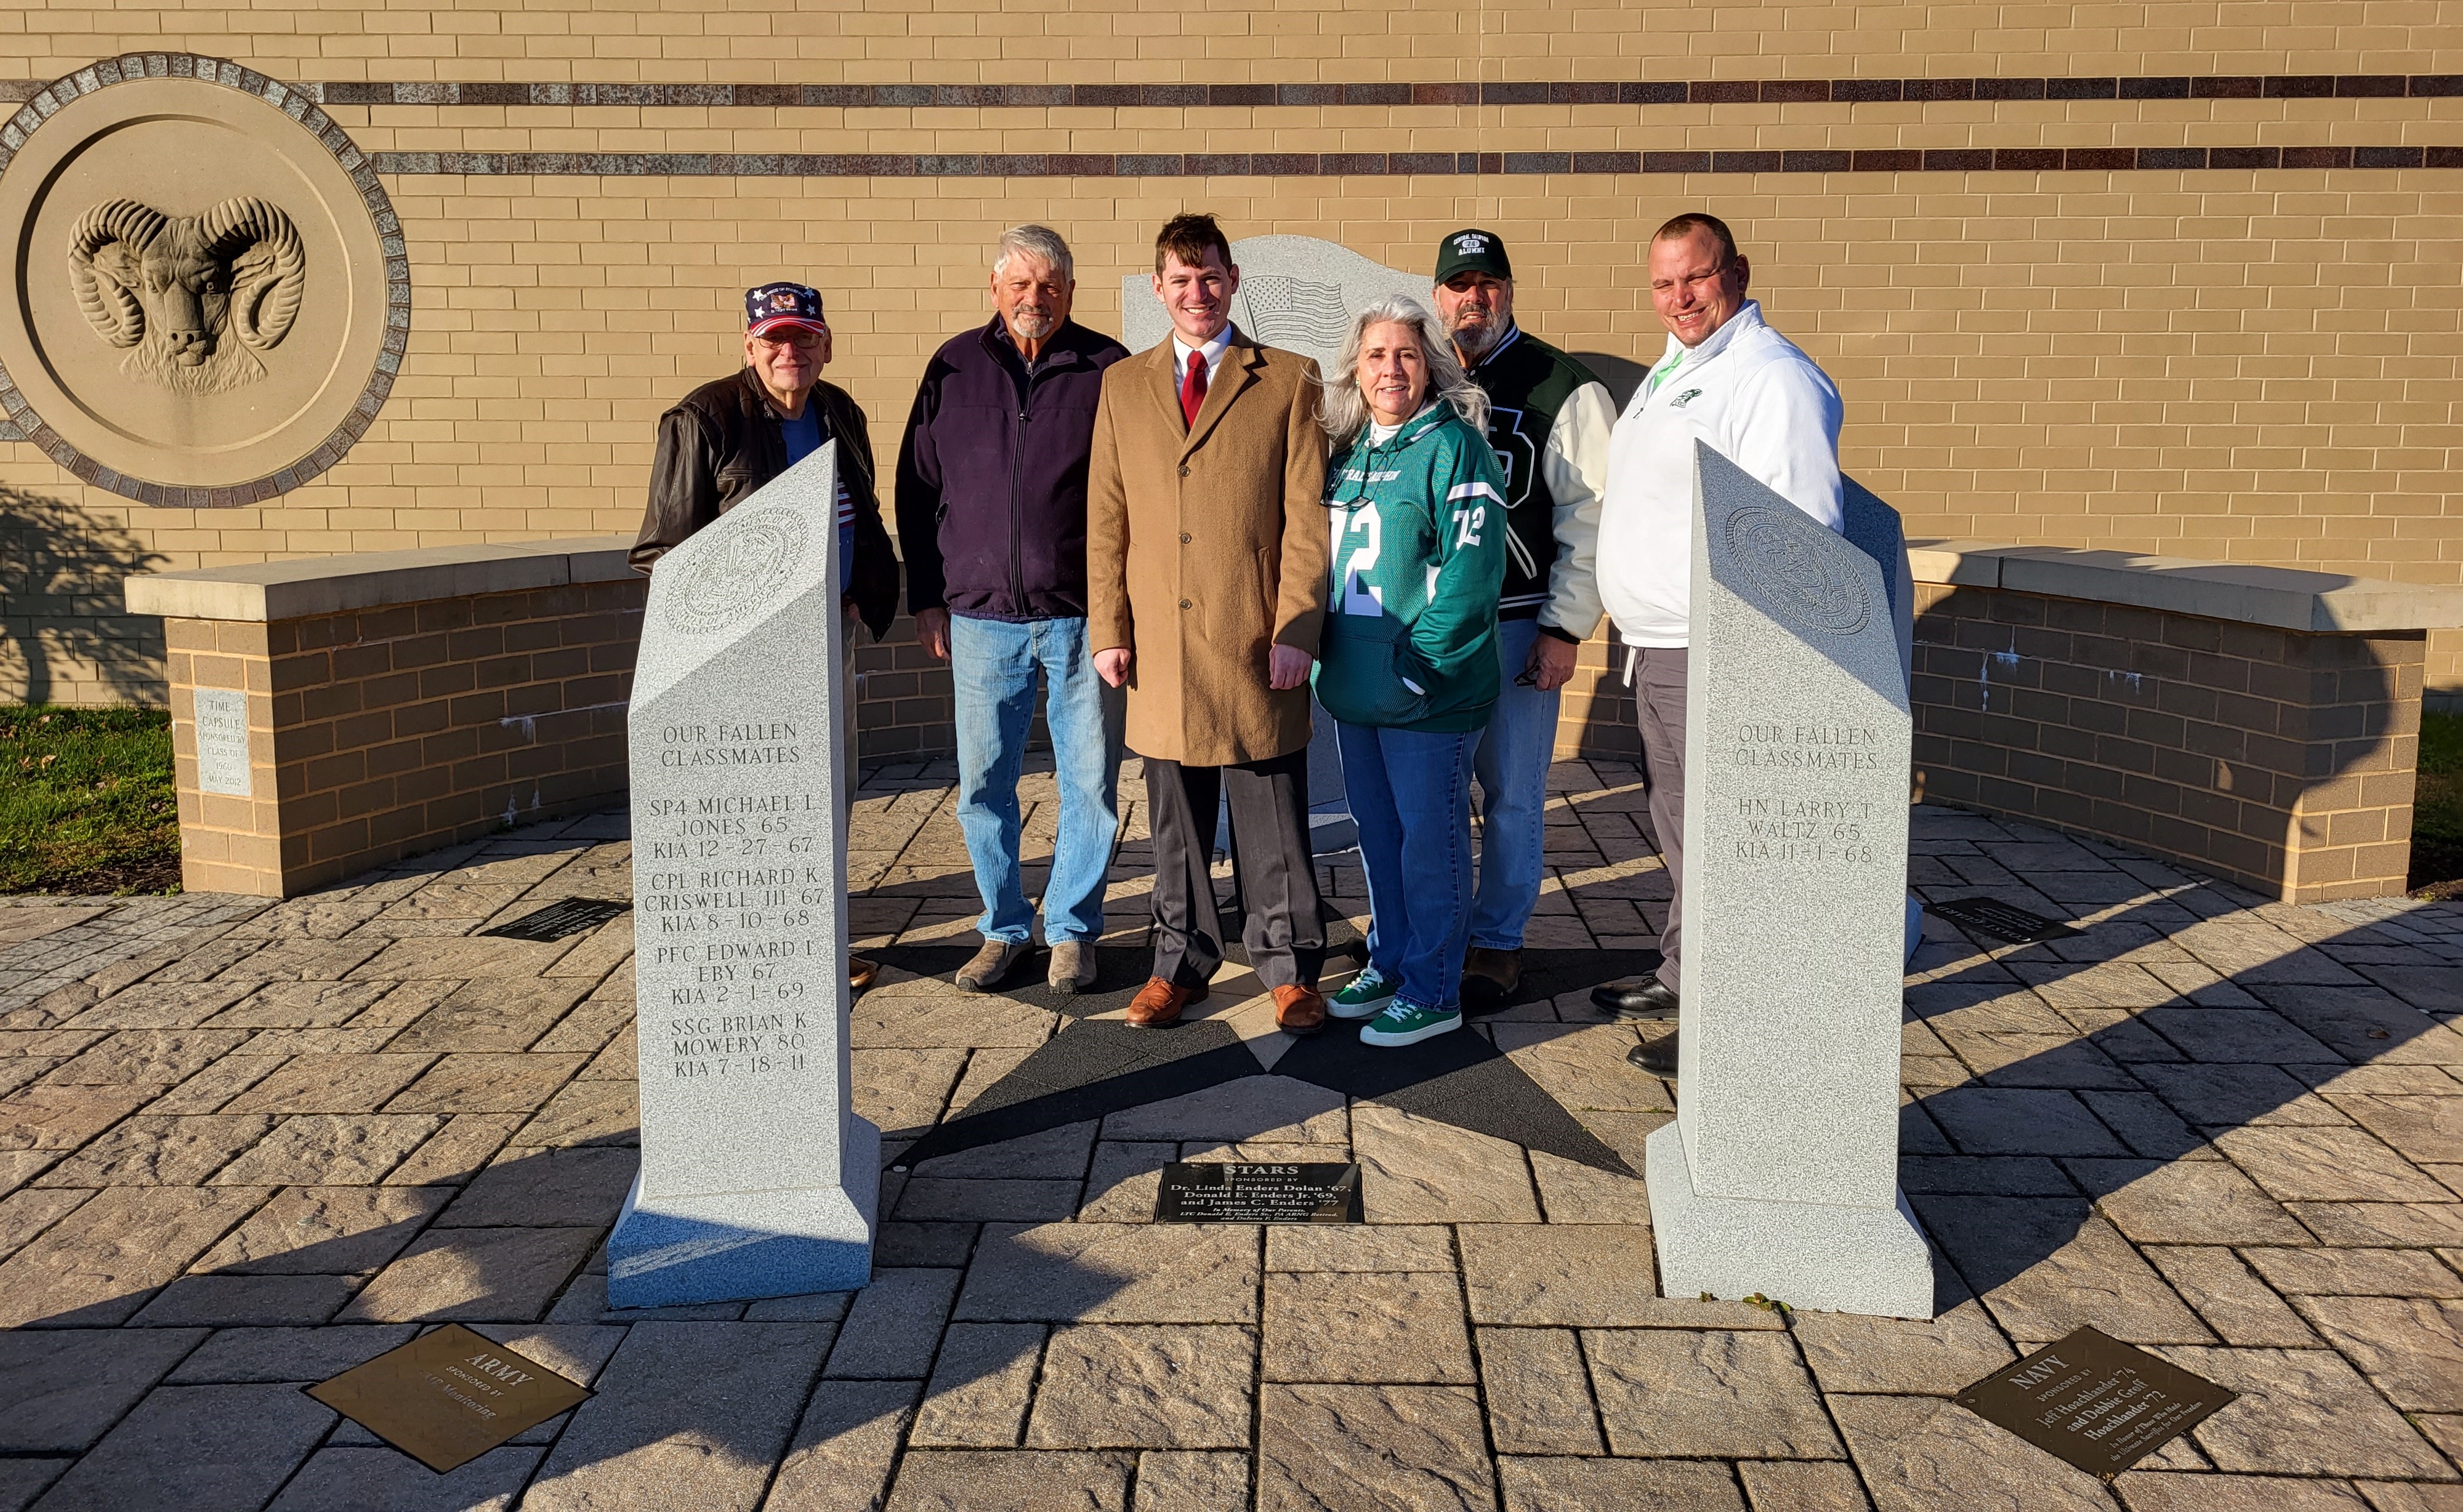 Rep. Joe Kerwin met with our Veterans Committee and Principal Shrader. L to R: Dave Johnston, Don Morse, Rep. Kerwin, Debbie Hoachlander, Jeff Hoachlander, Eric Shrader.